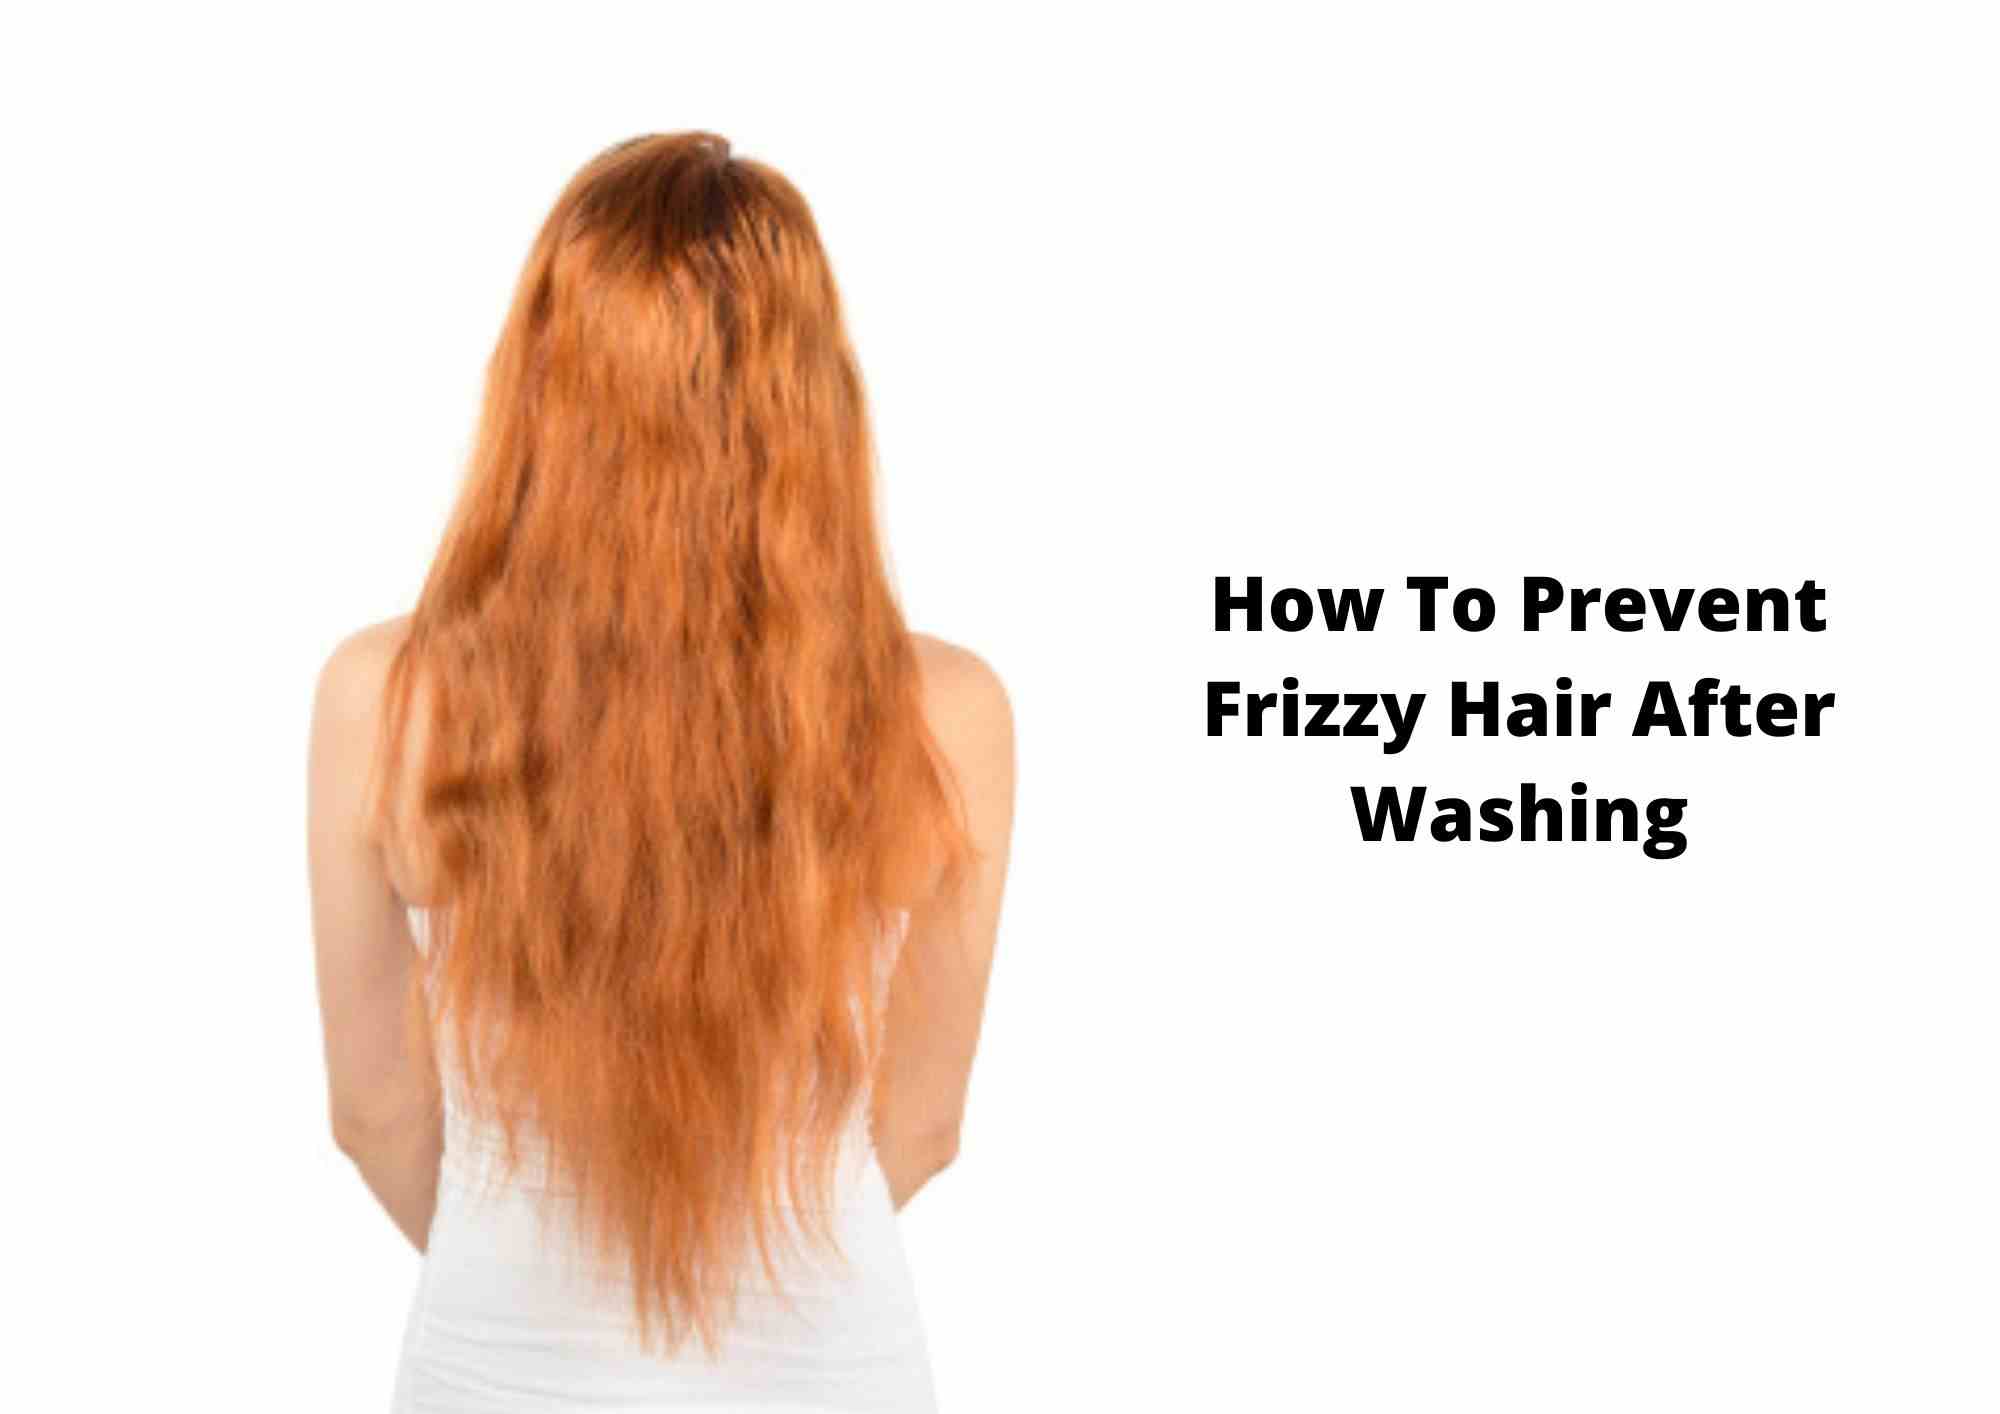 How to Stop Frizzy Hair After Washing